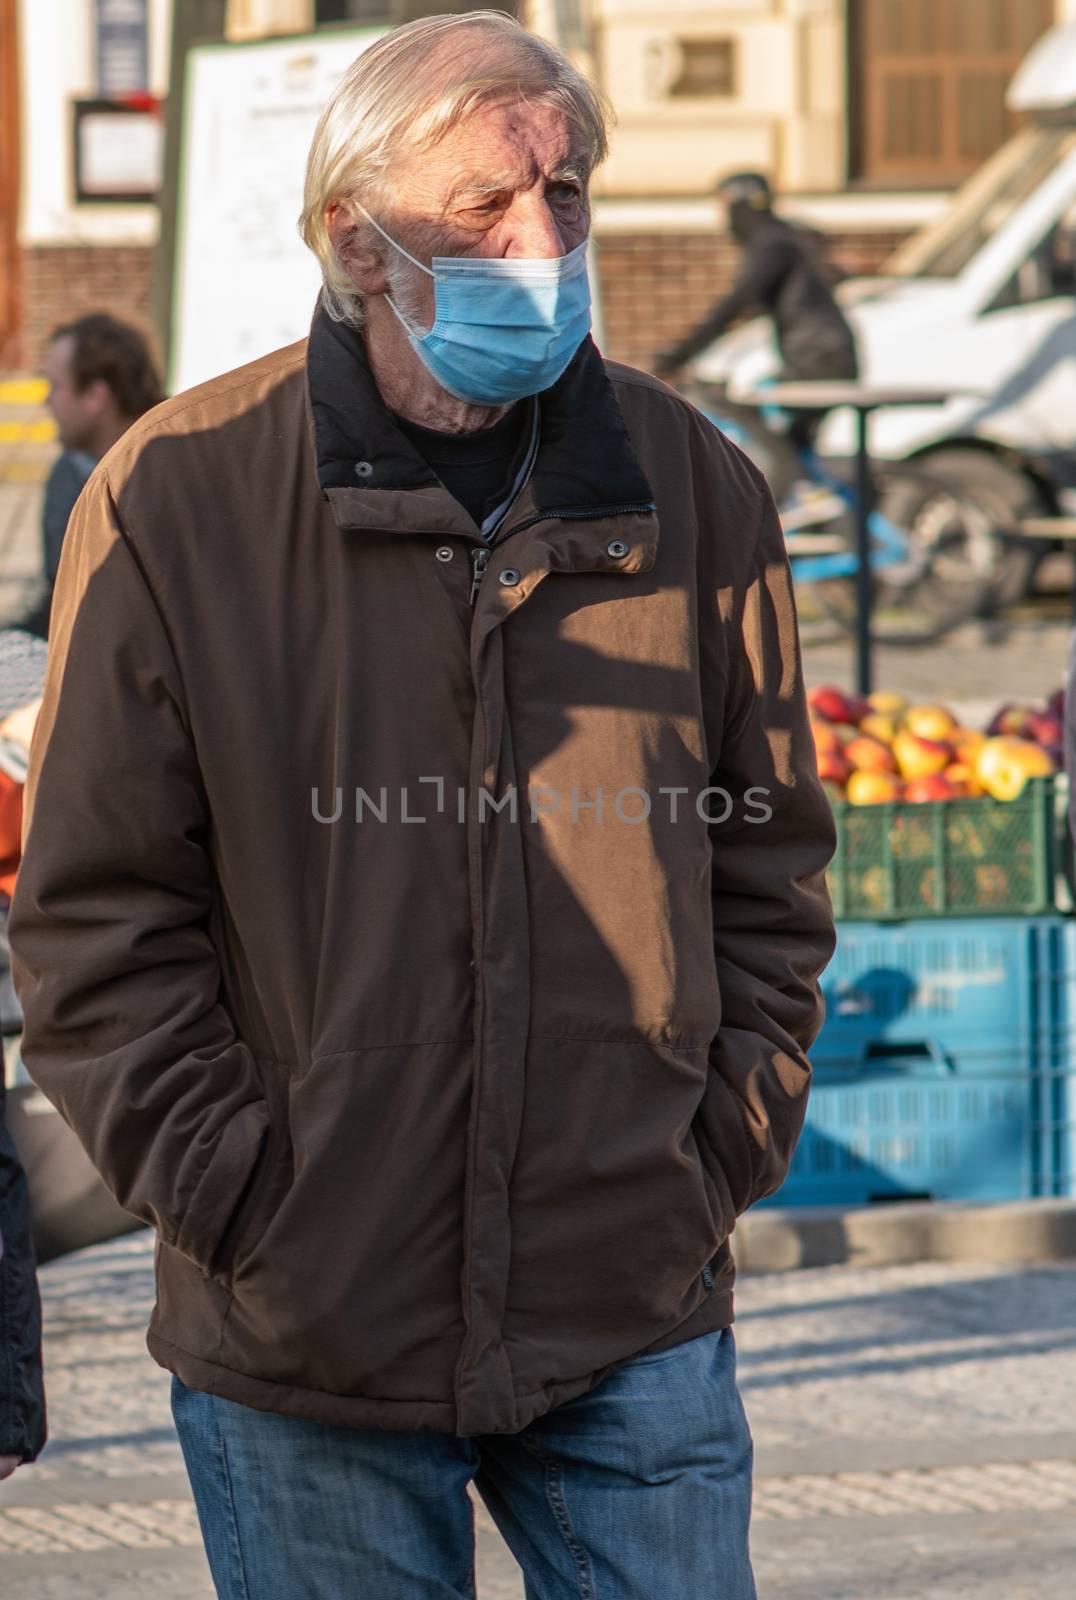 11/16/2020. Prague, Czech Republic. An old man is wearing masks while crossing the street close to Hradcanska tram stop during quarantine by gonzalobell